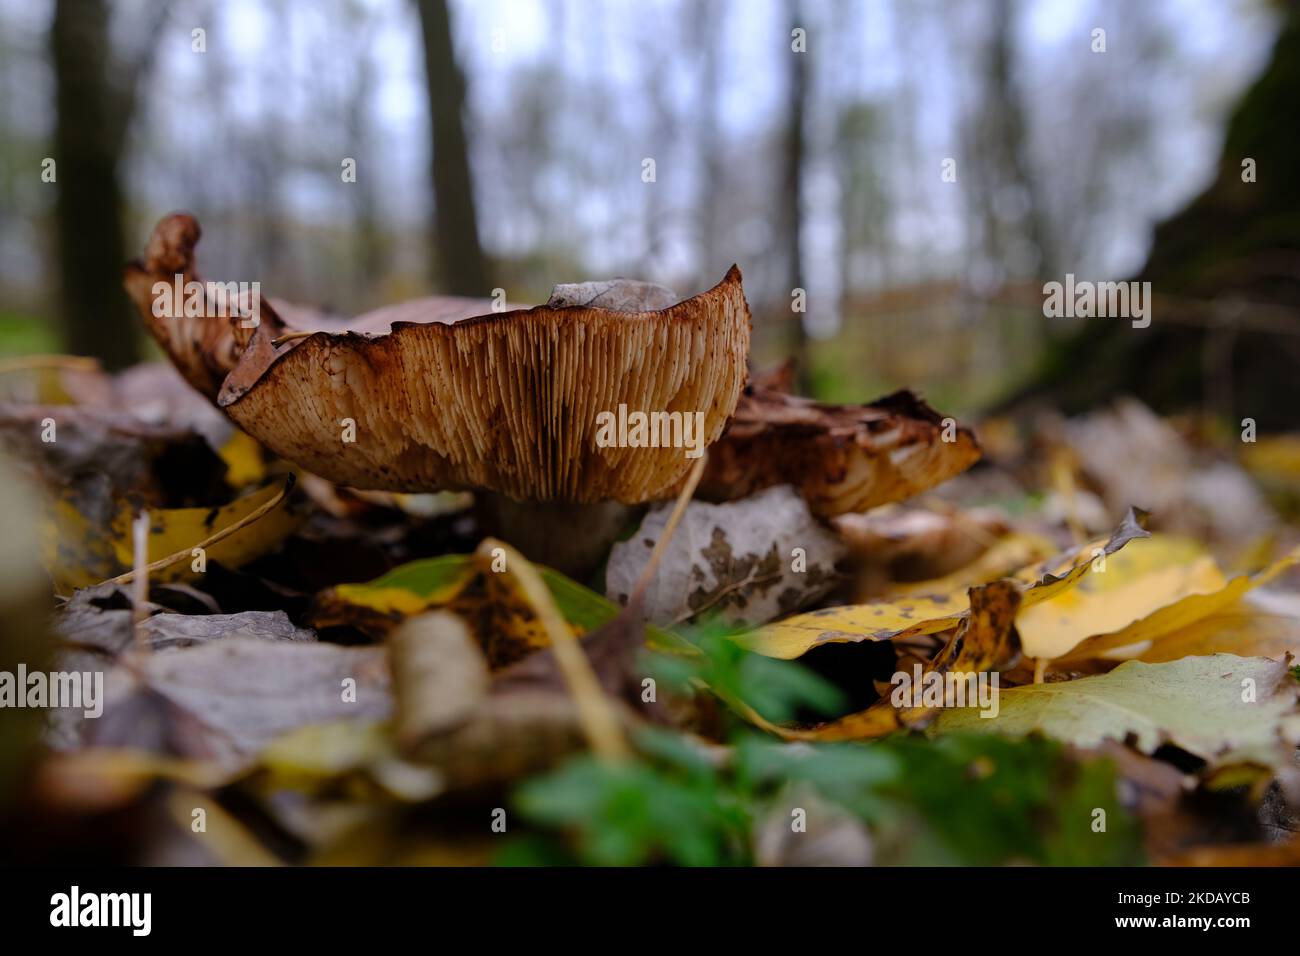 huge mushroom lepista nuda, also clitocybe nuda wood blewit mushroom in the autumn forest day. Mushroomer mushroom in the forest. Stock Photo